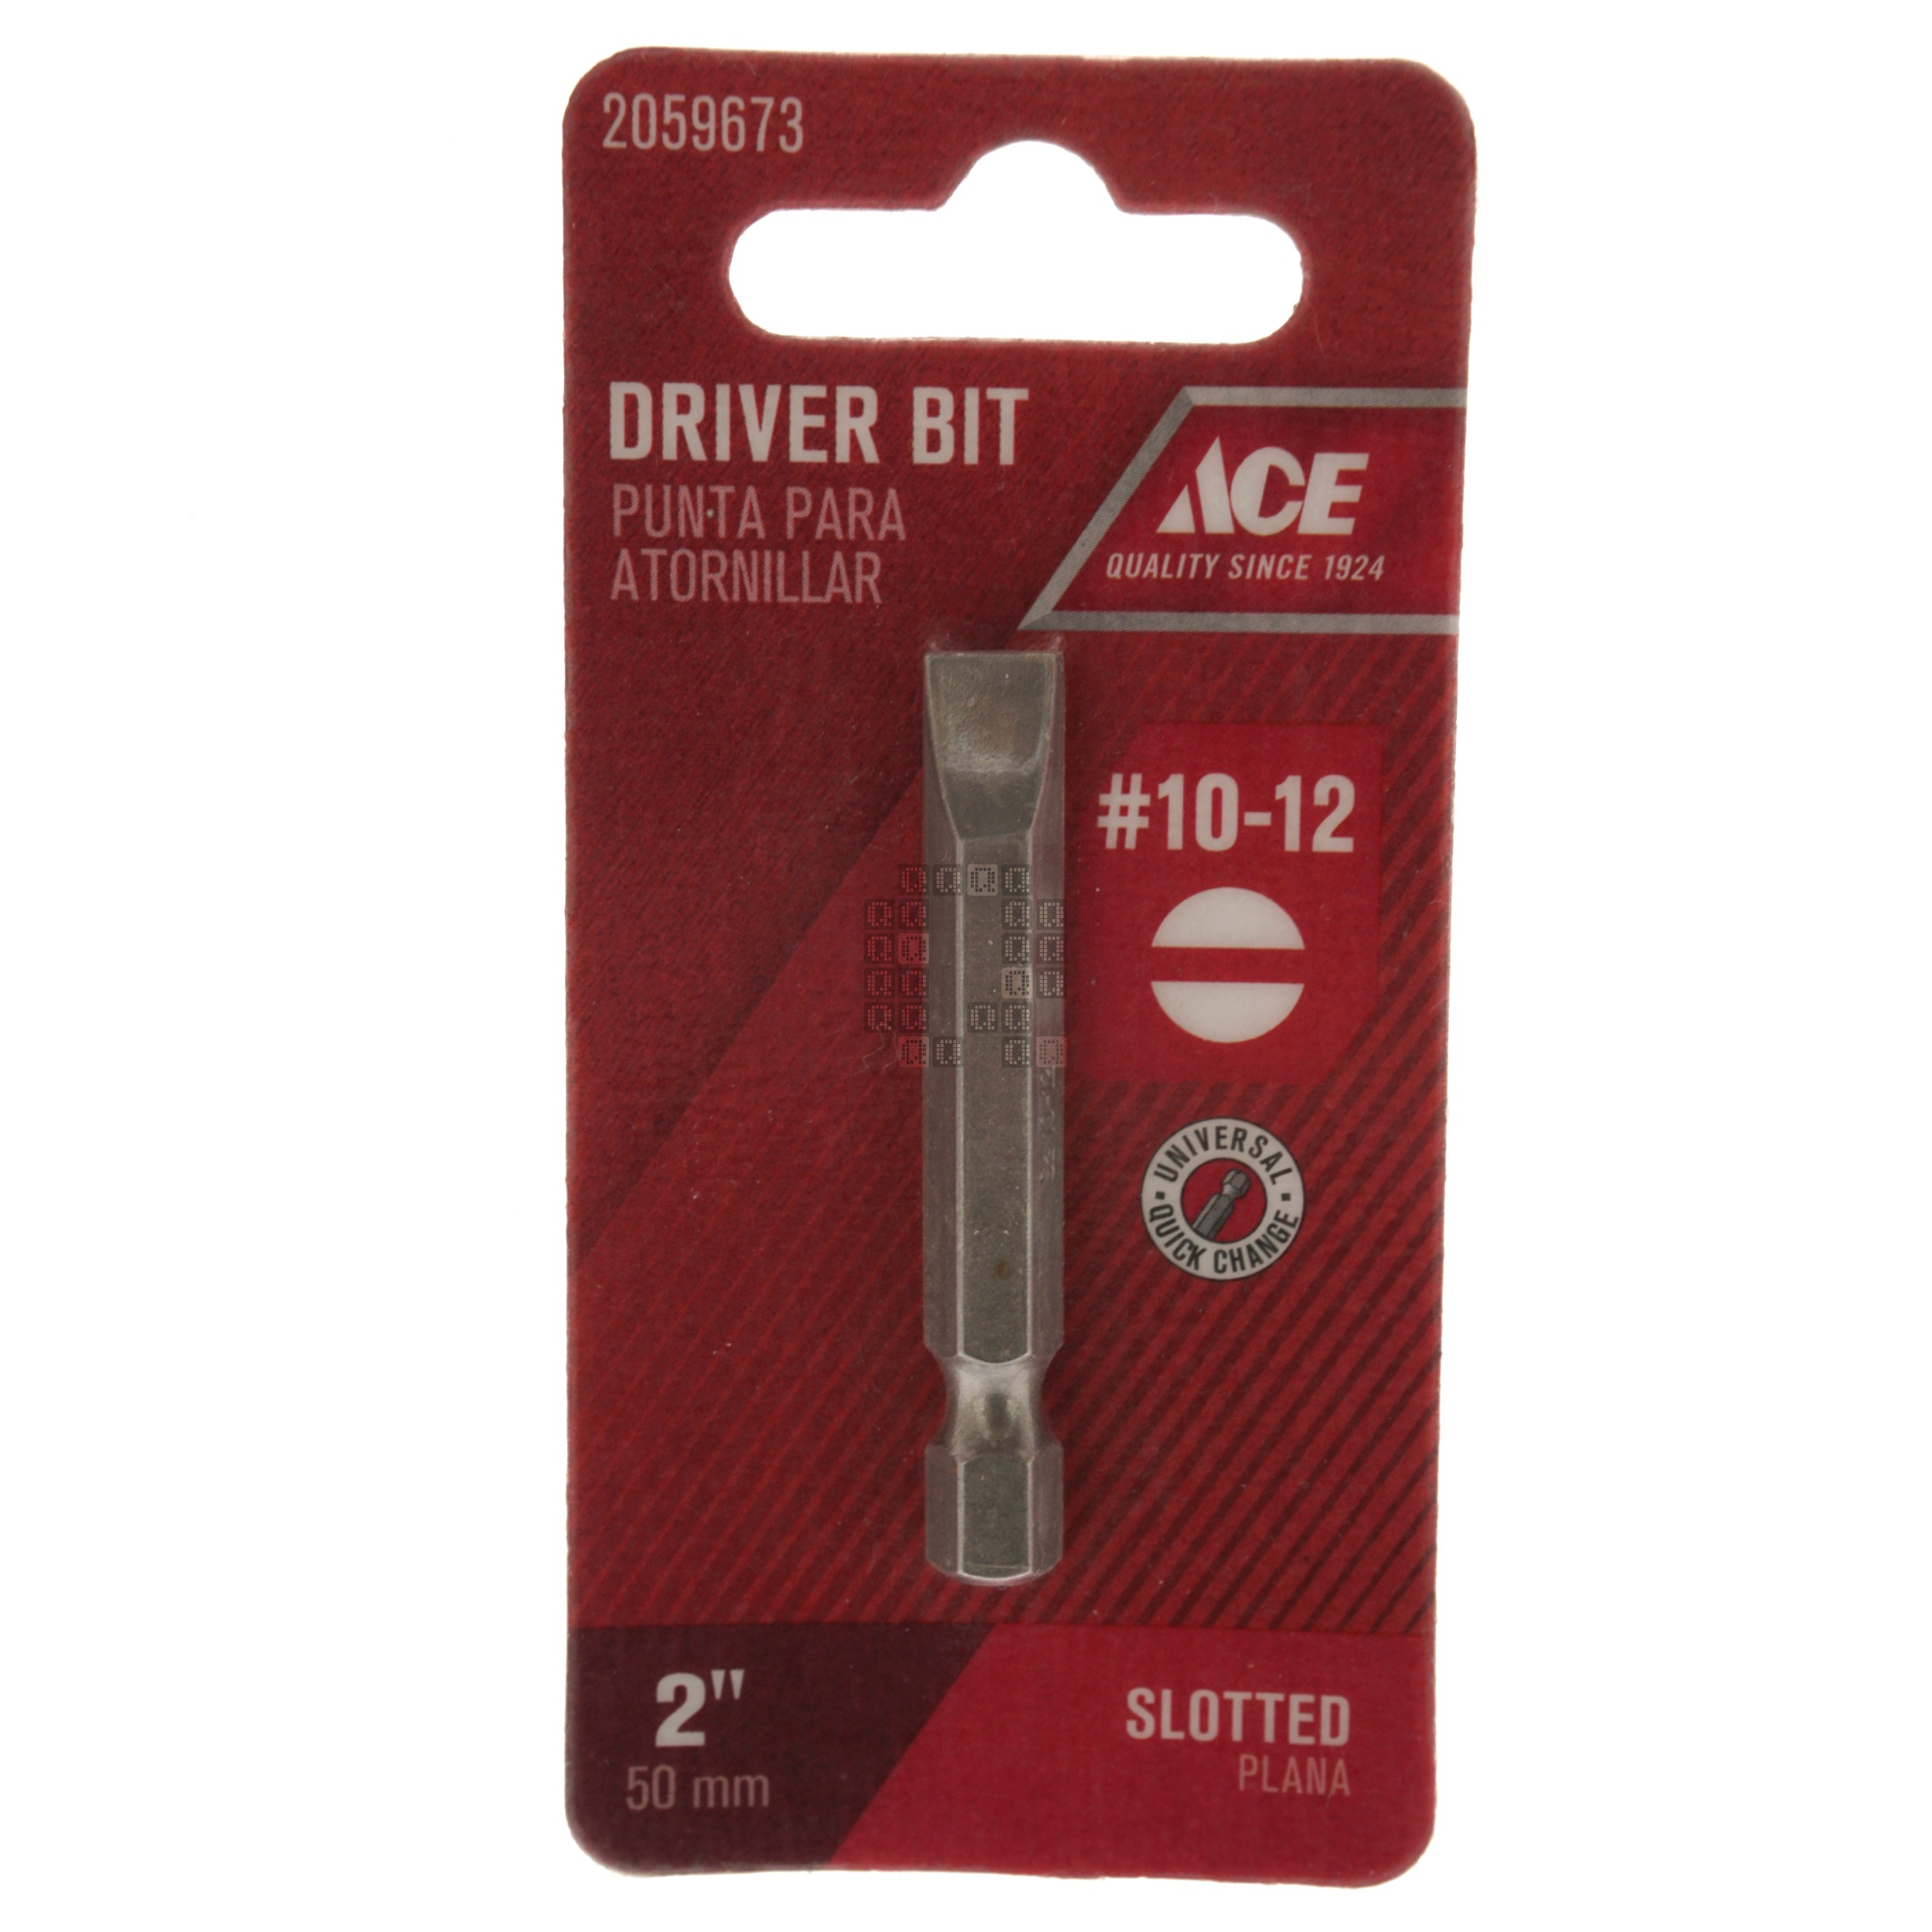 ACE Hardware 2059673 #10-12 Slotted Driver Bit, 2" Length, 1/4" Hex Drive